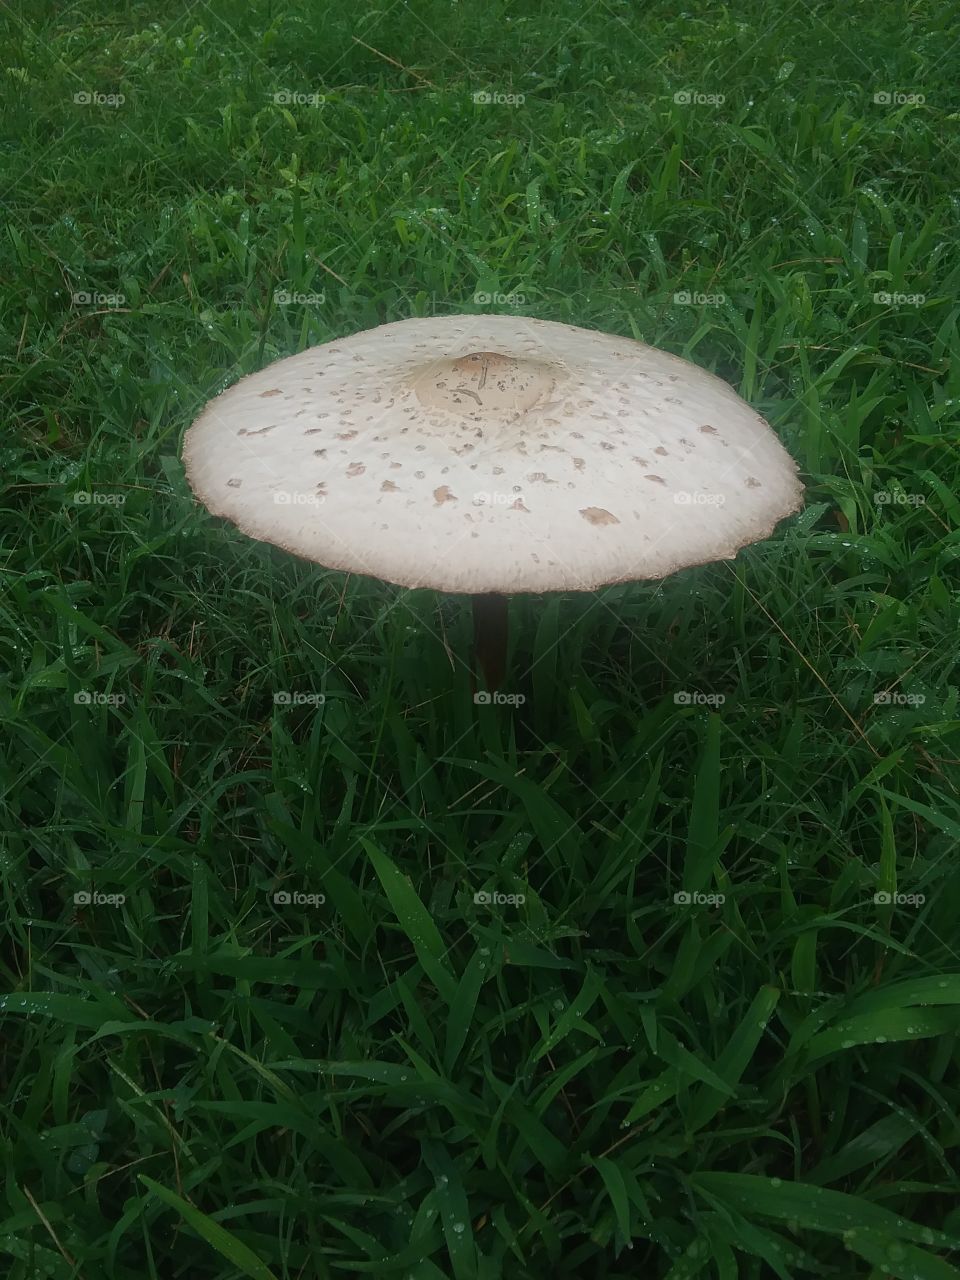 mushroom surrounded by a sea of grass